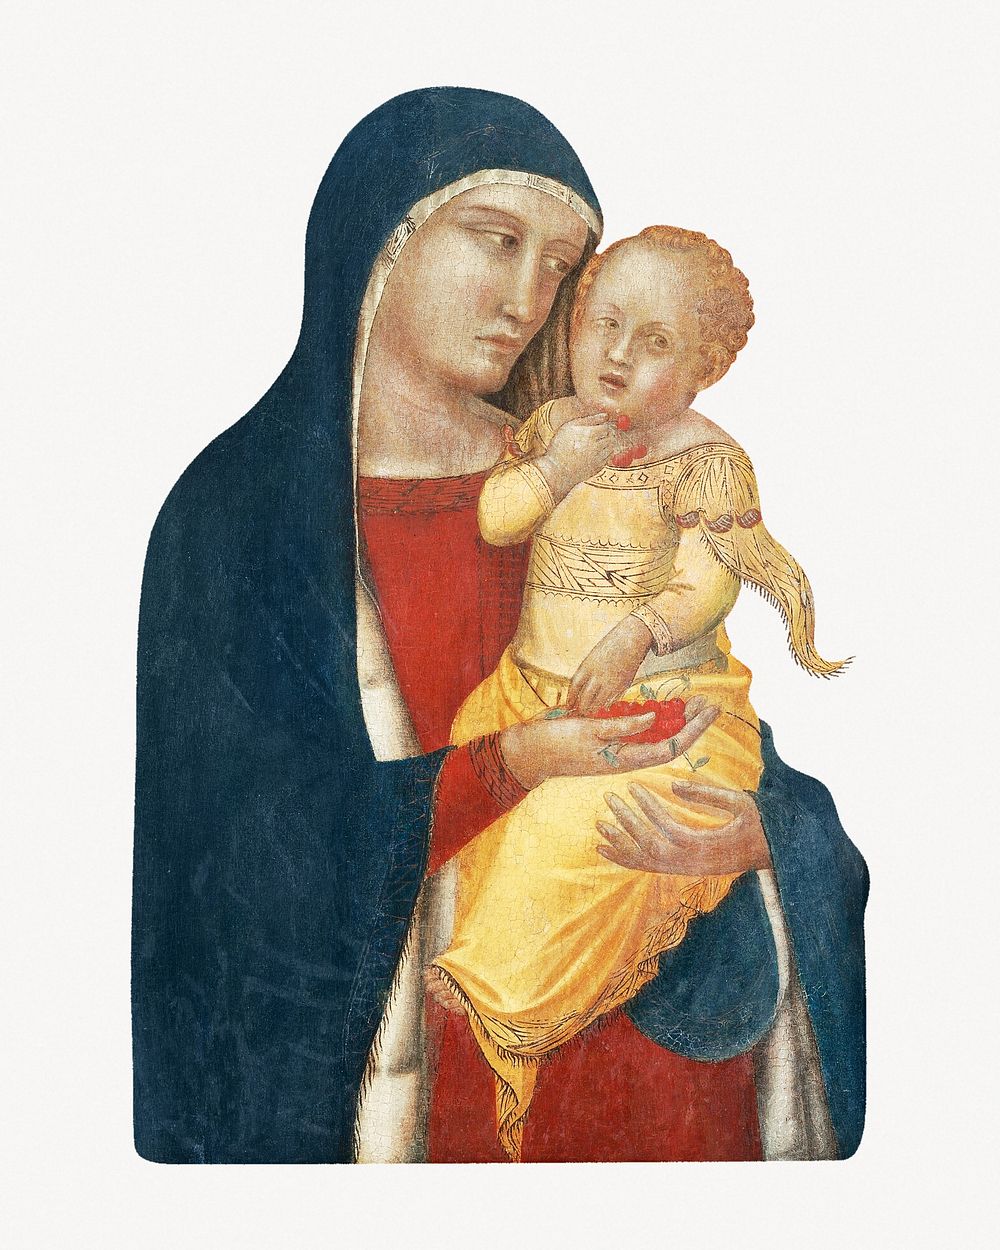 Madonna and Child with the Blessing Christ, vintage religious illustration.   Remastered by rawpixel